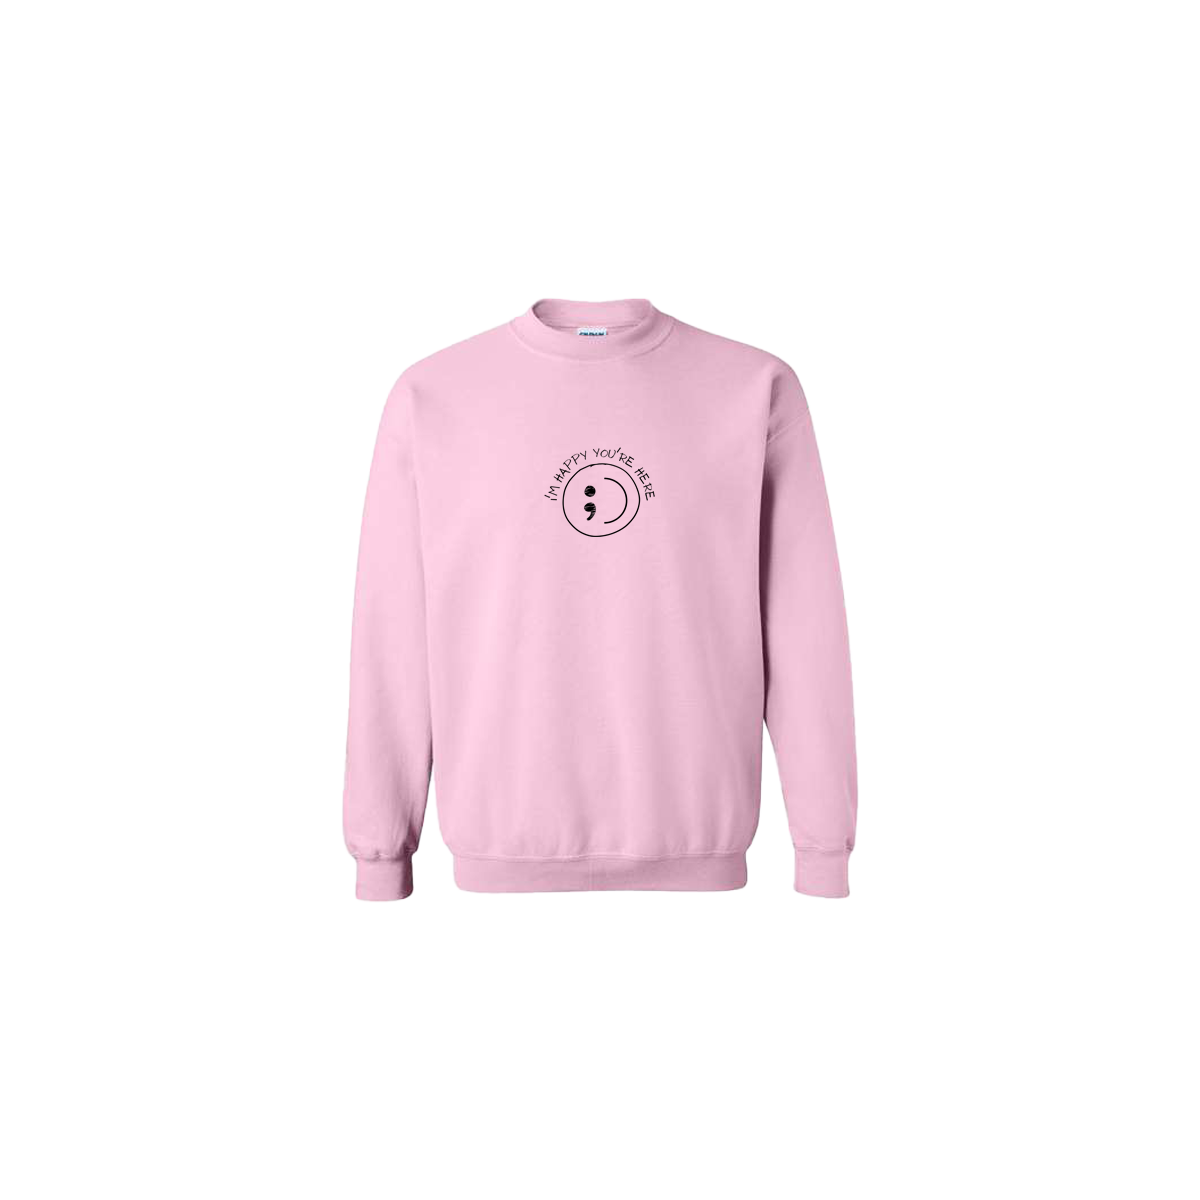 I'm Happy You're Here Embroidered Light Pink Crewneck - Mental Health Awareness Clothing